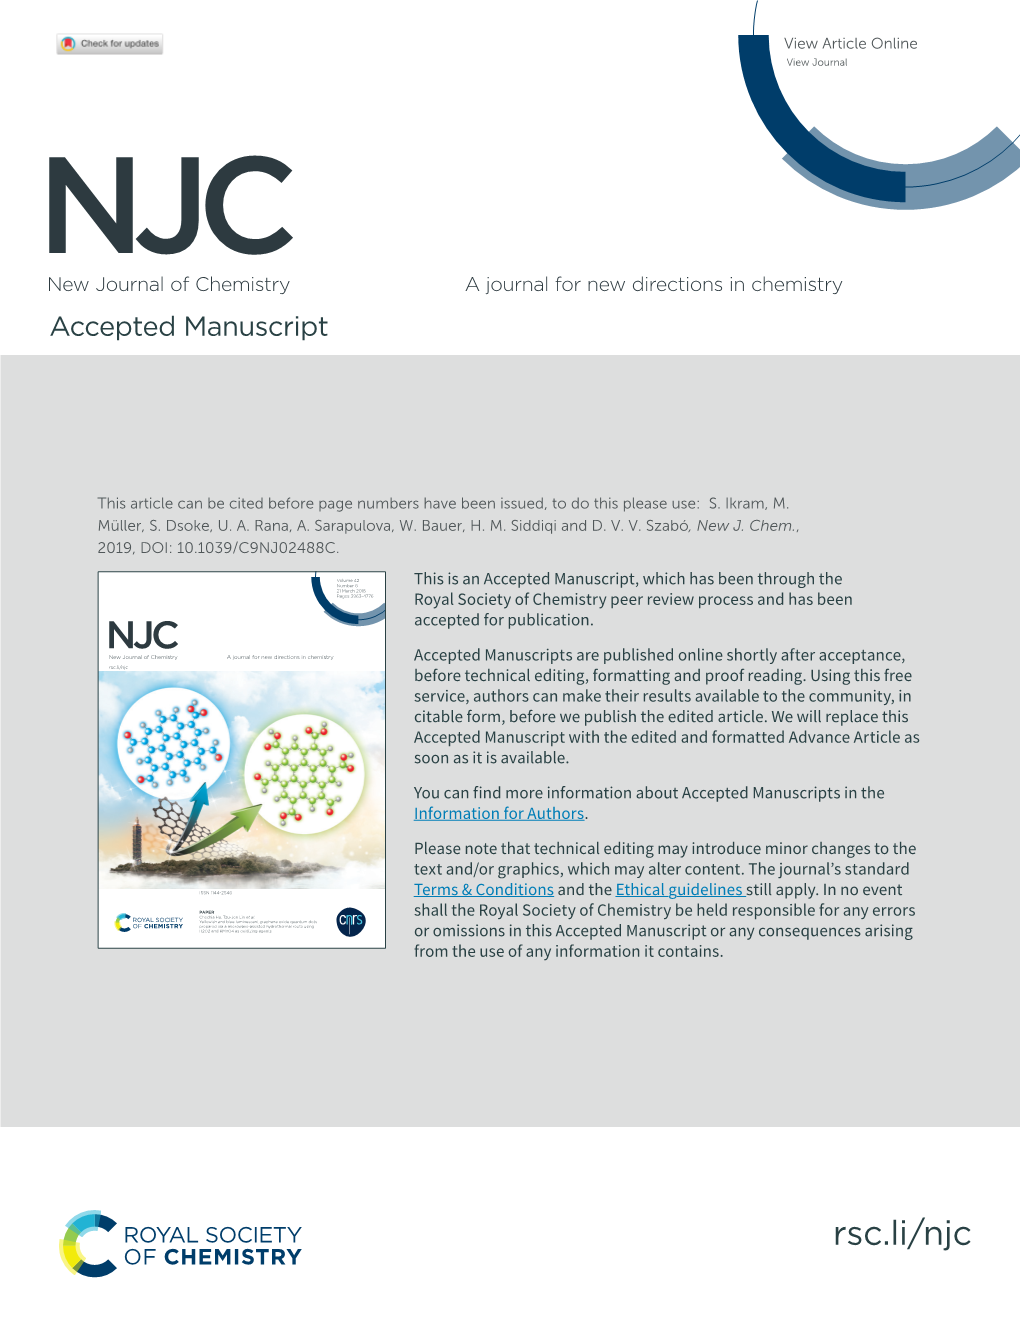 NJC New Journal of Chemistry a Journal for New Directions in Chemistry Accepted Manuscript